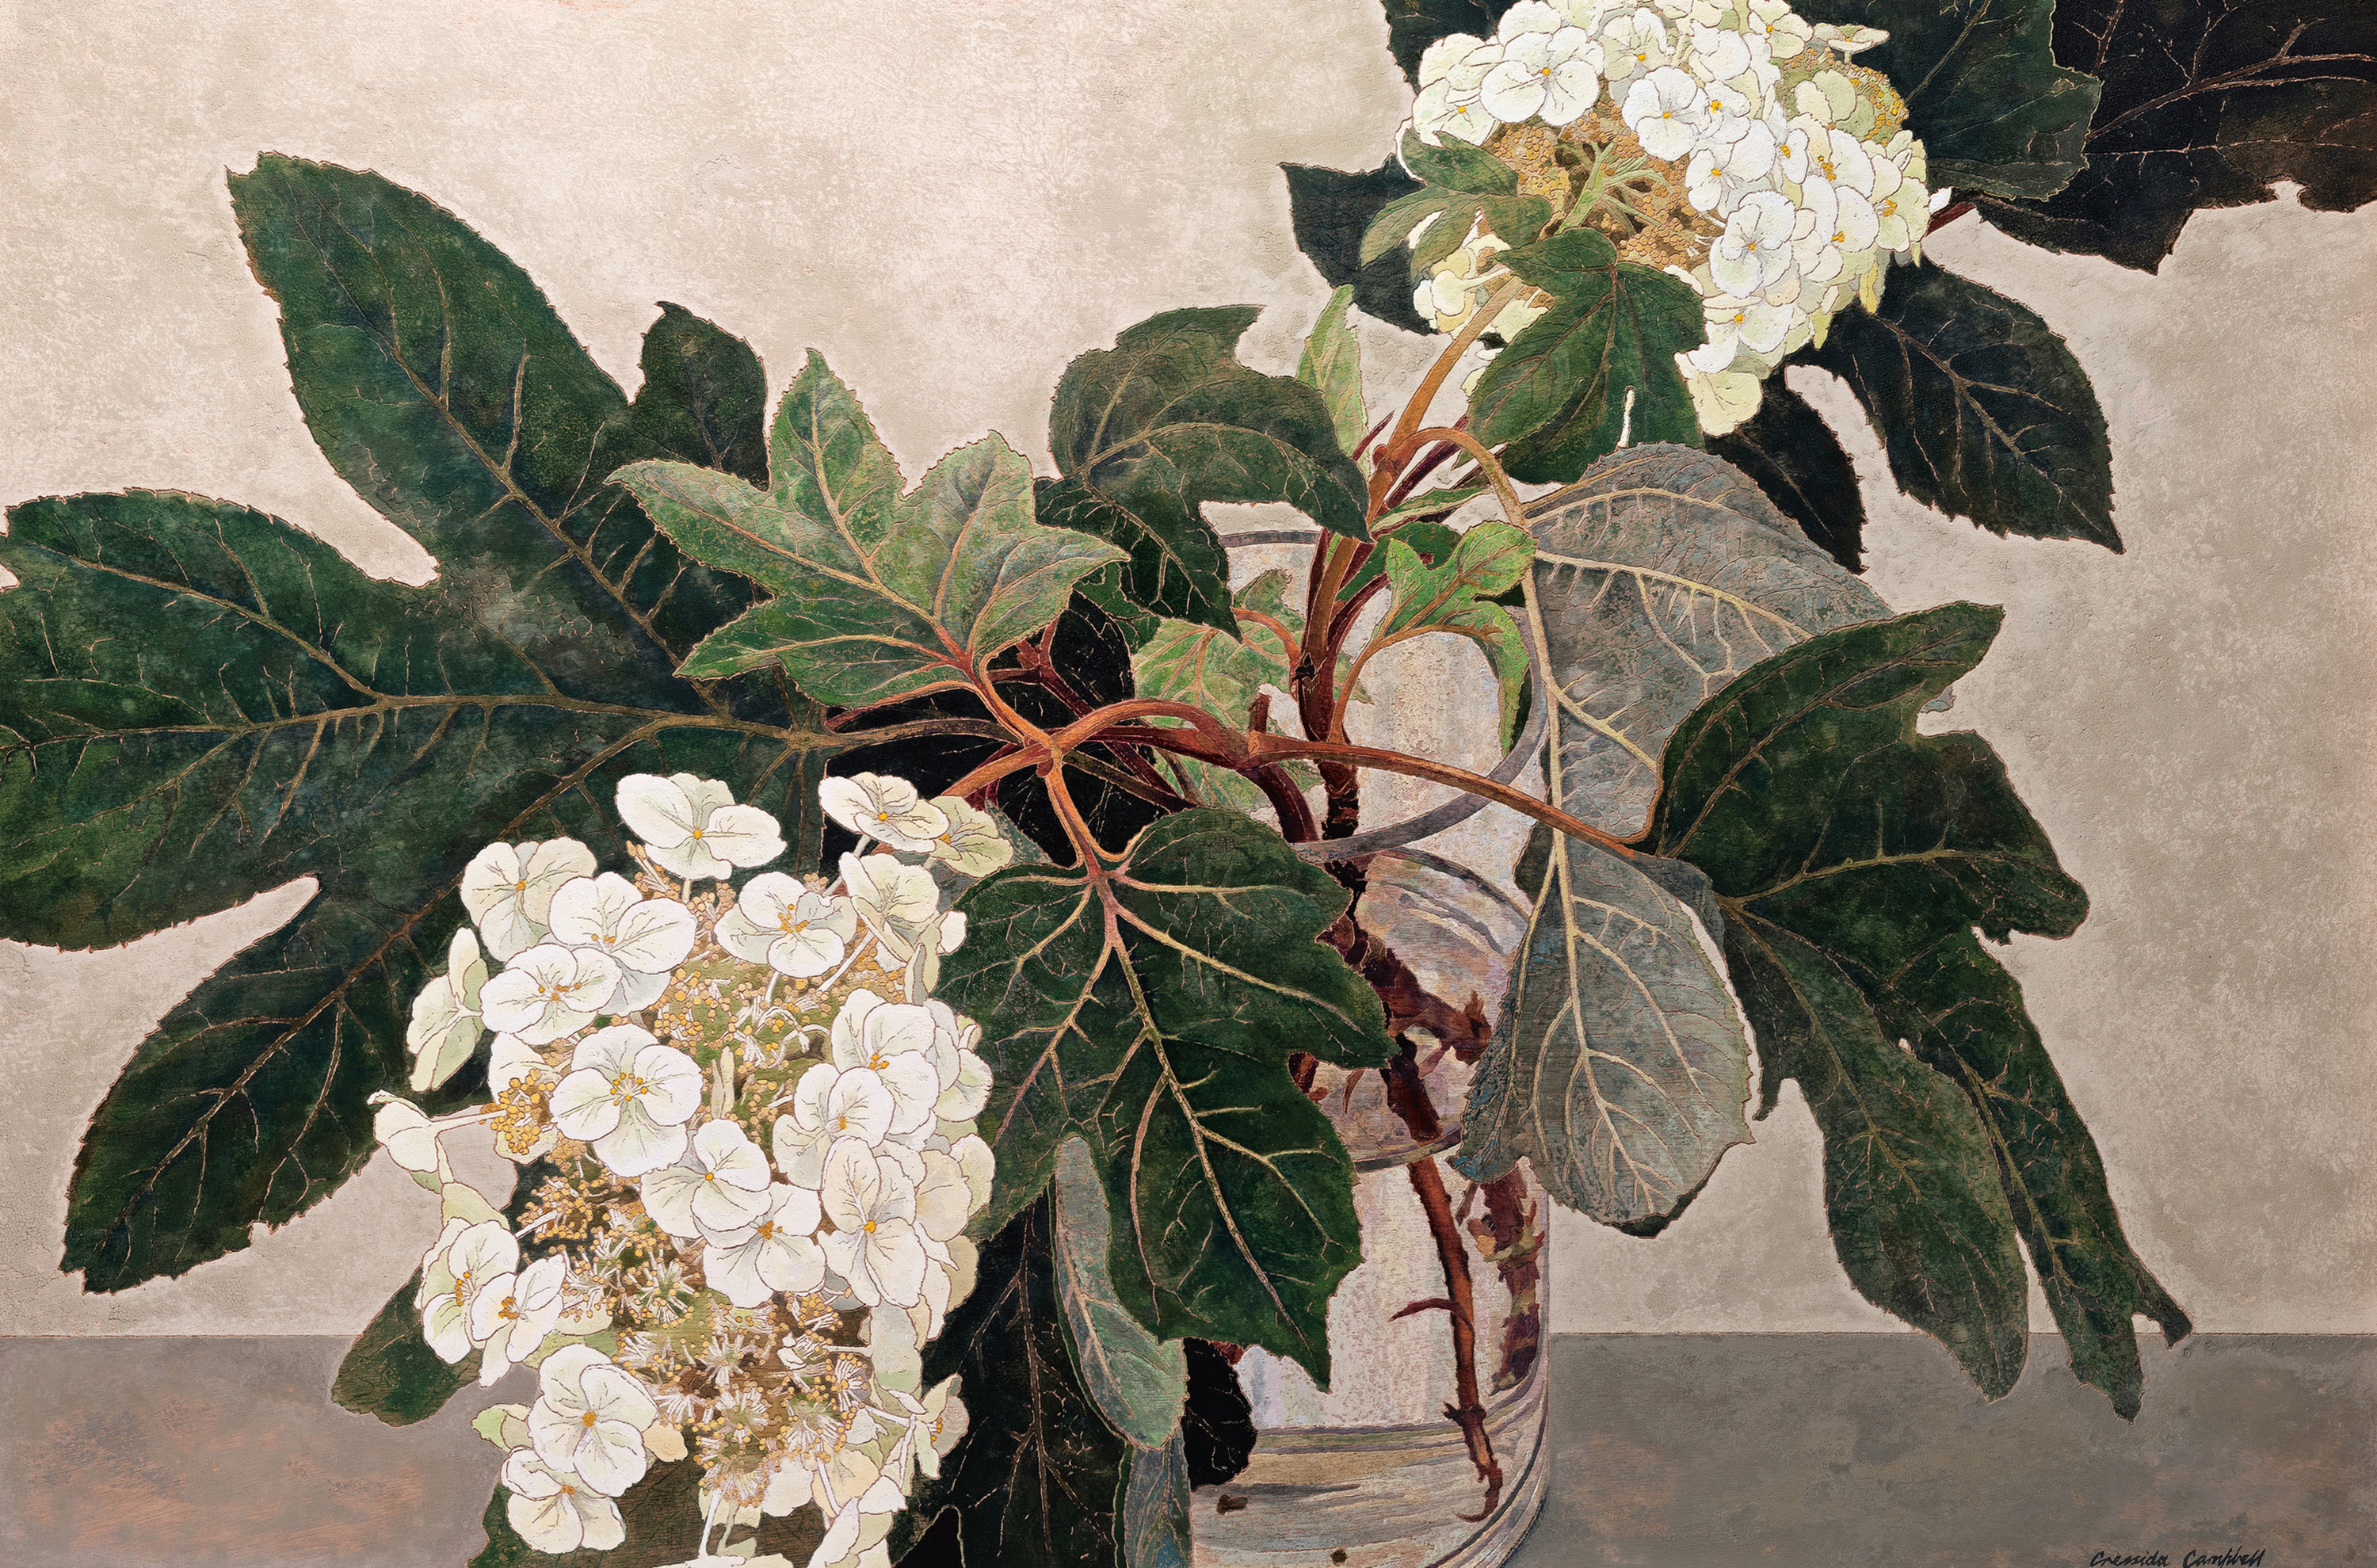 A painting of Japanese hydrangeas, a small white flower growing in clusters on a vine, in a jar of water